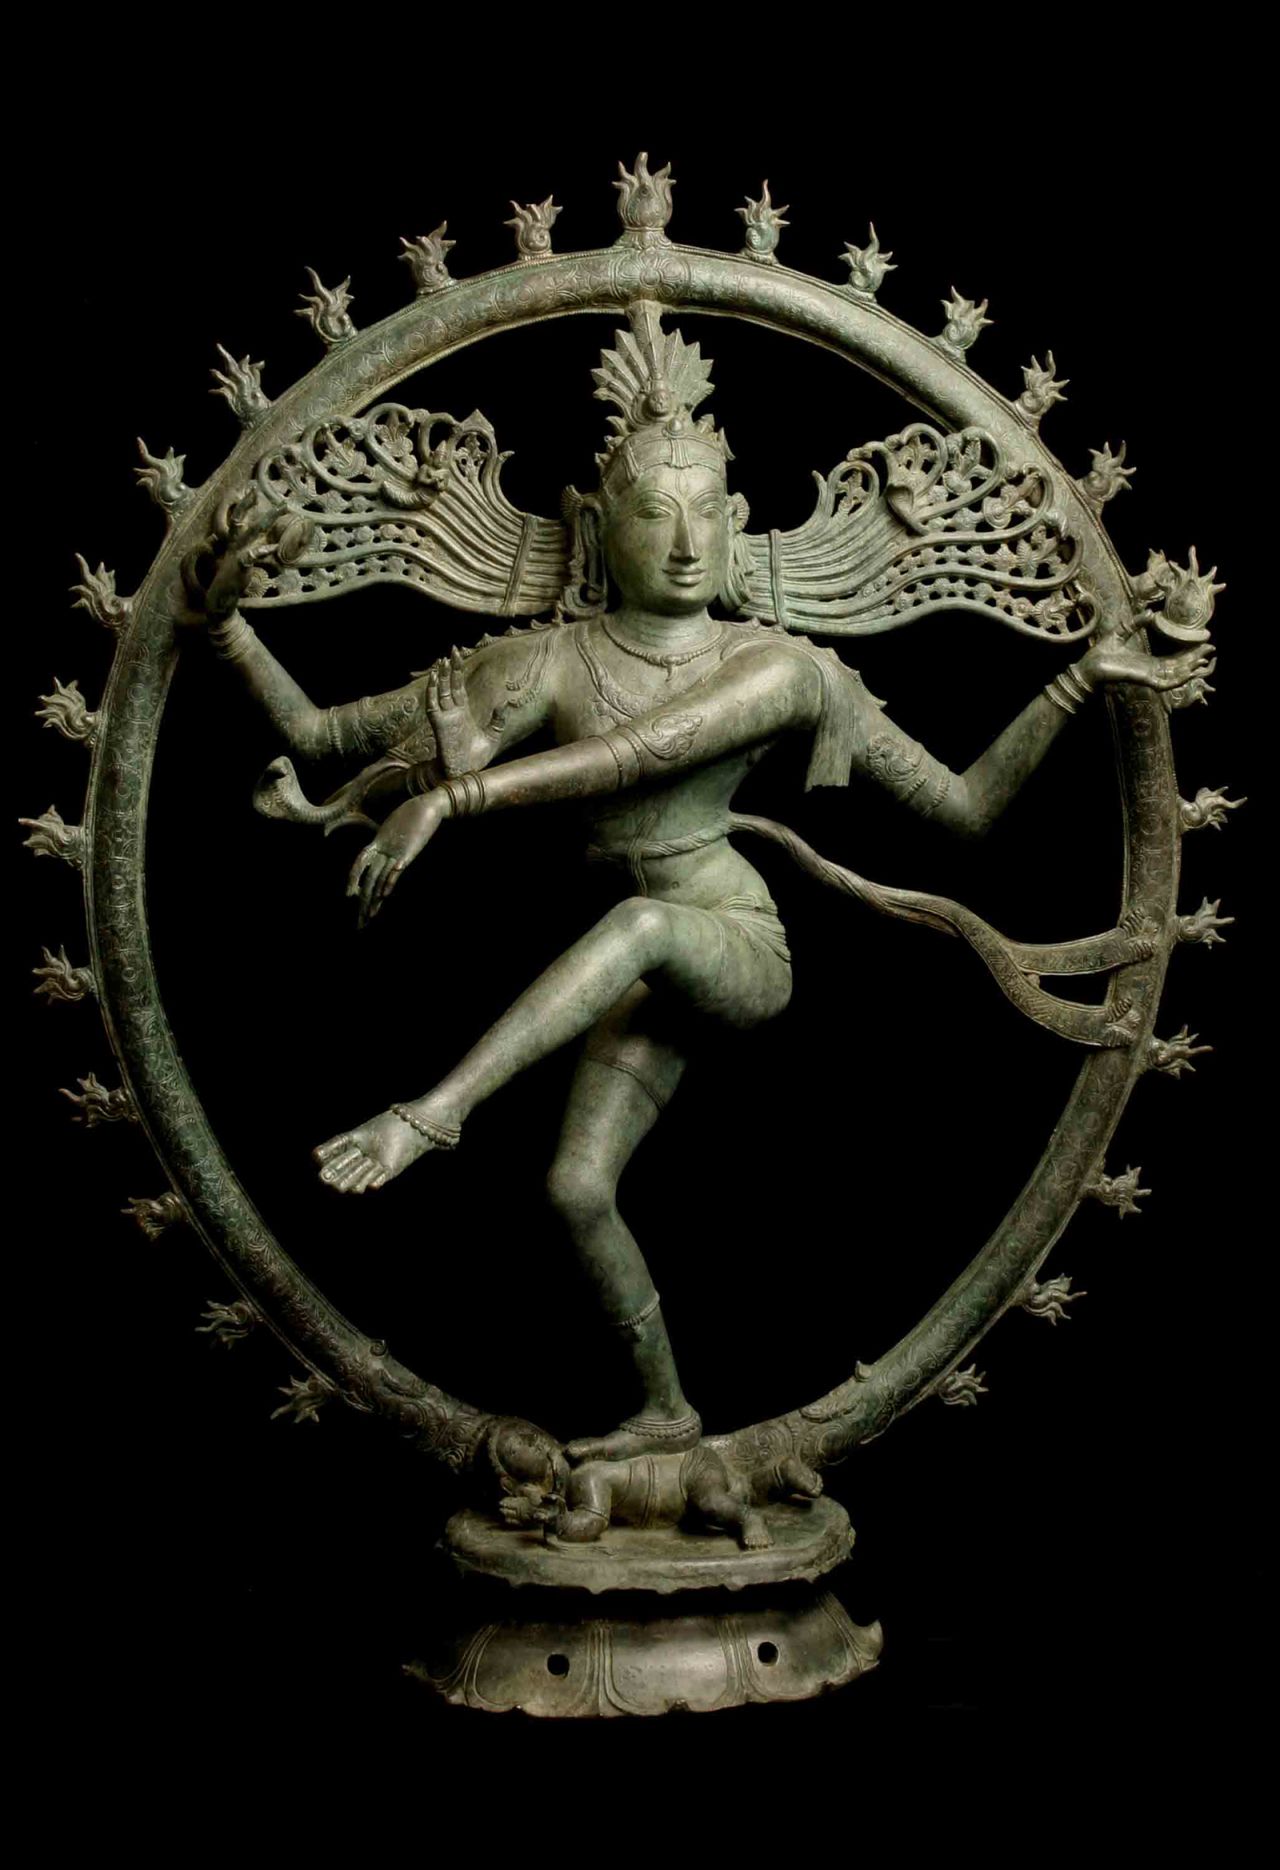 A Shiva Nataraja statue that was among the stolen items allegedly possessed and restored by Neil Perry Smith.